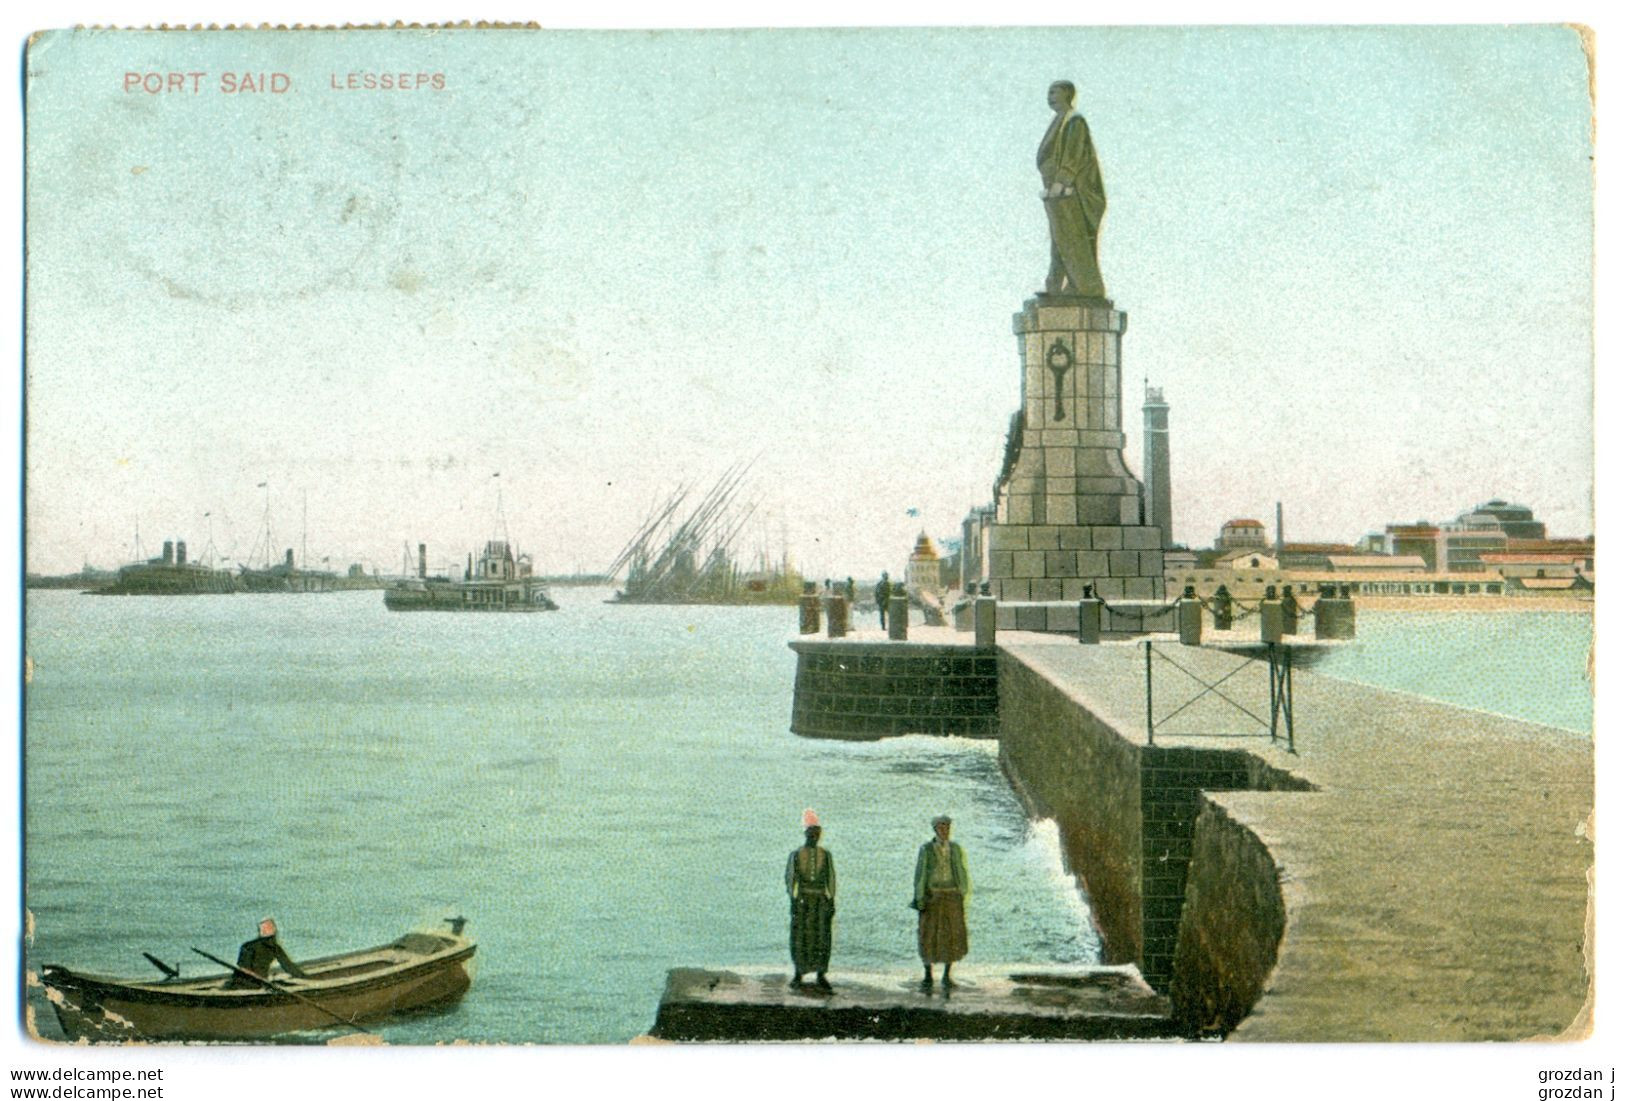 SPRING-CLEANING LOT (7 POSTCARDS, One Torn), Port Said, Egypt - Port Said